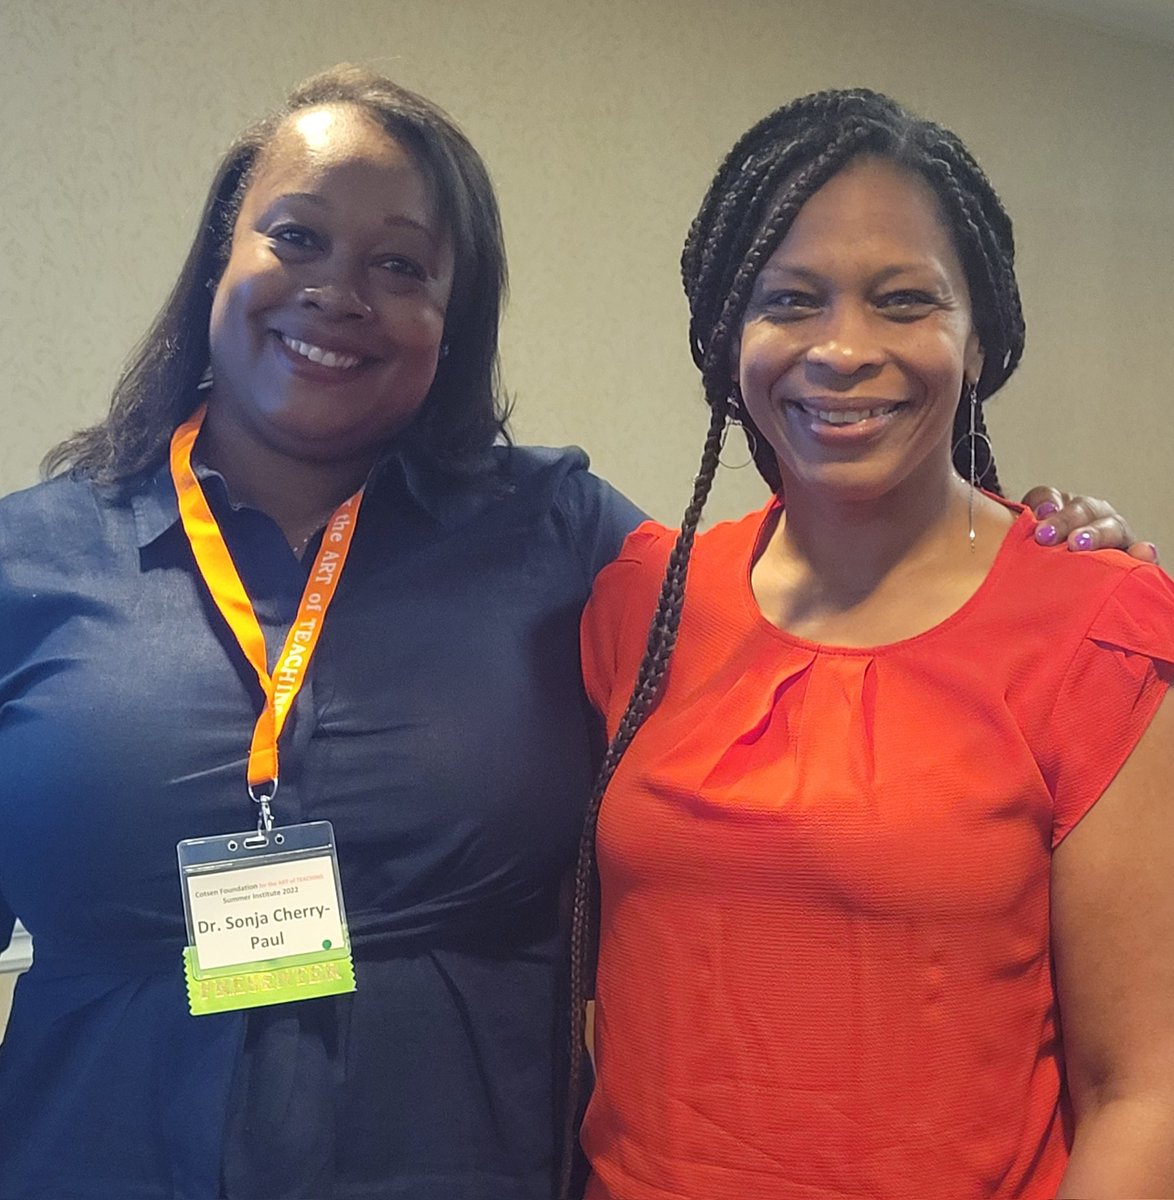 Such a pleasure listening to the keynote of Stamped for Kids coauthor @SonjaCherryPaul at the #CotsenConnect summer conference.